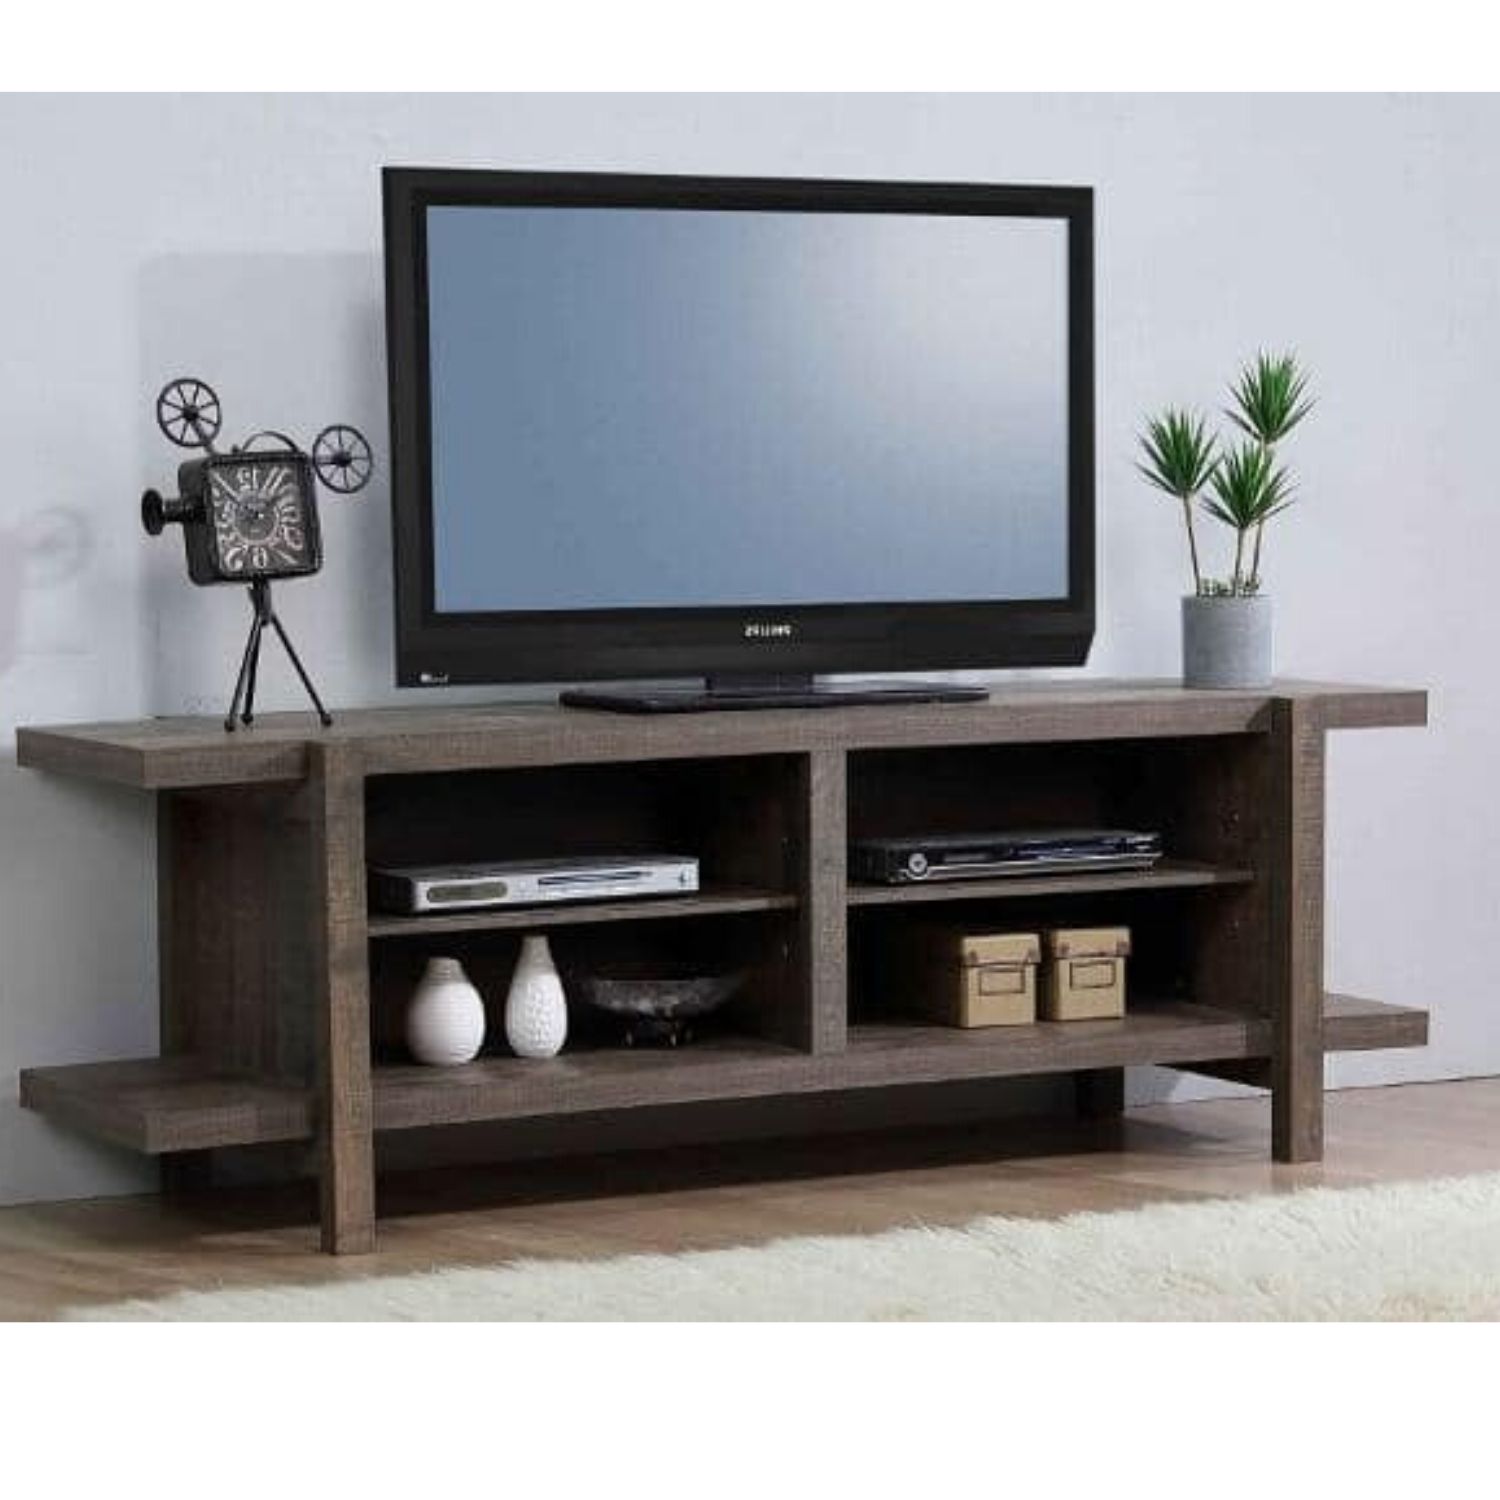 Tammy 65'' Tv Stand For Tvs Up To 70'', Rustic Mdf Wood Tv In Brigner Tv Stands For Tvs Up To 65" (Gallery 7 of 20)